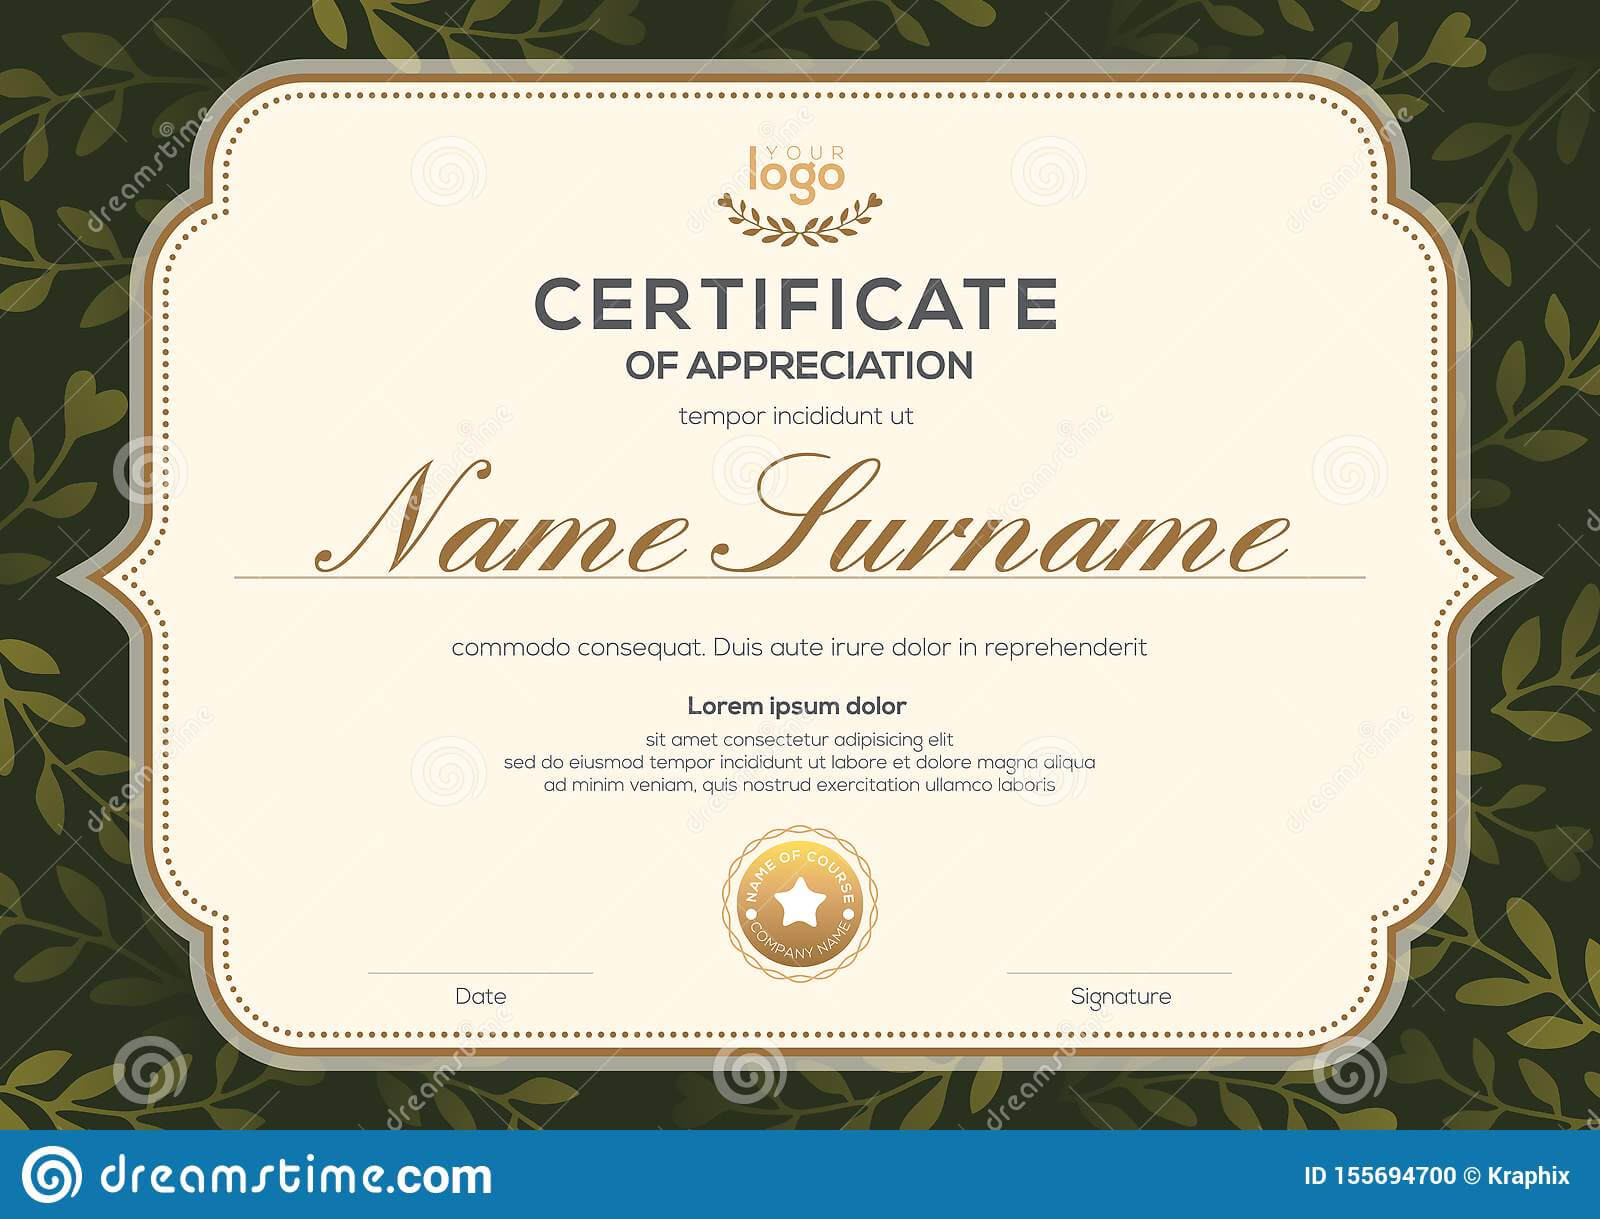 Certificate Template With Vintage Frame On Dark Green Floral For Commemorative Certificate Template